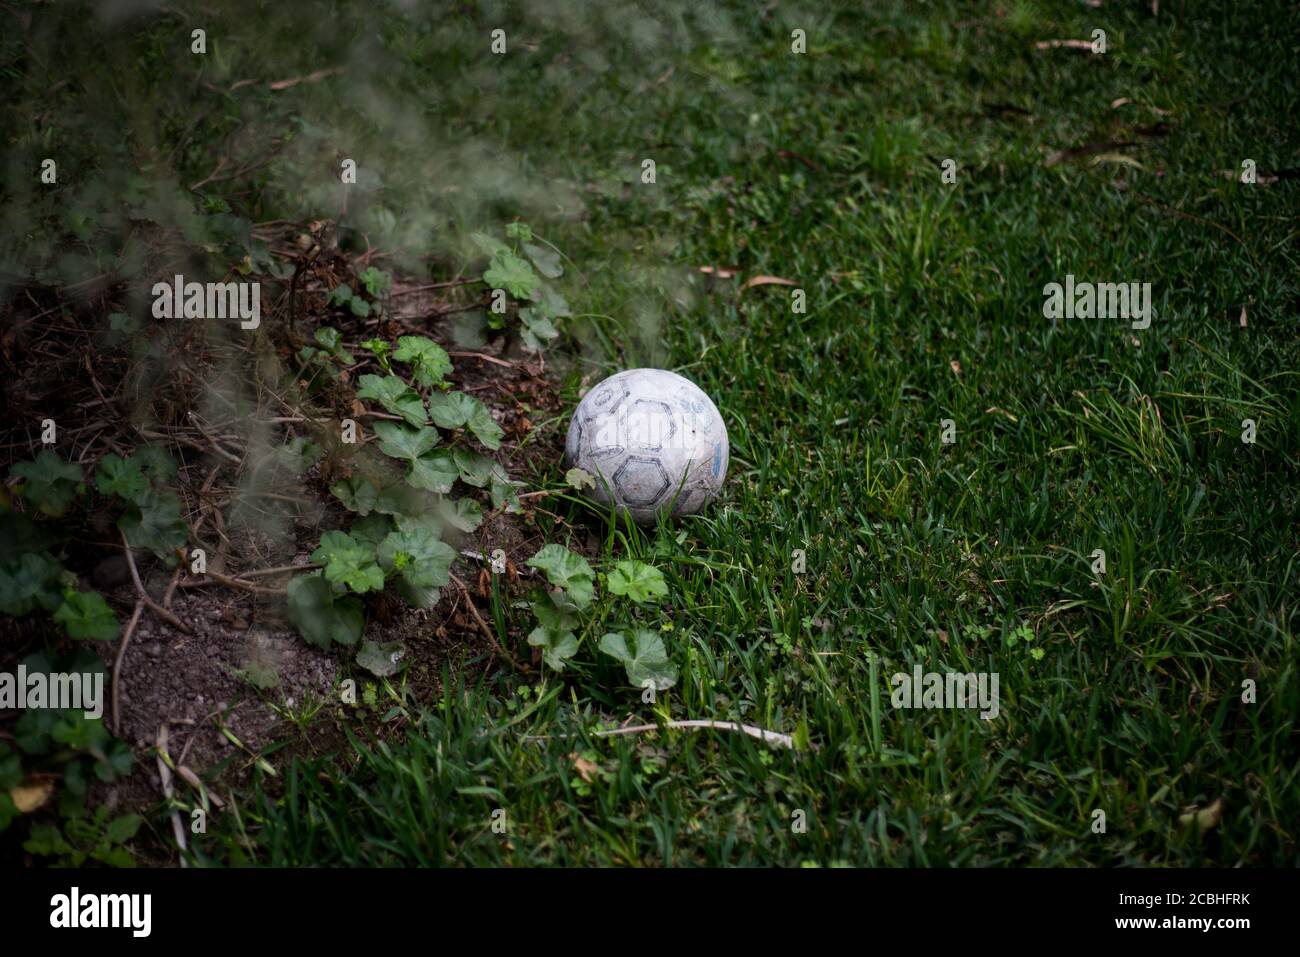 Low angle view of an old and dirty football abandoned in a garden next to a plant. Stock Photo